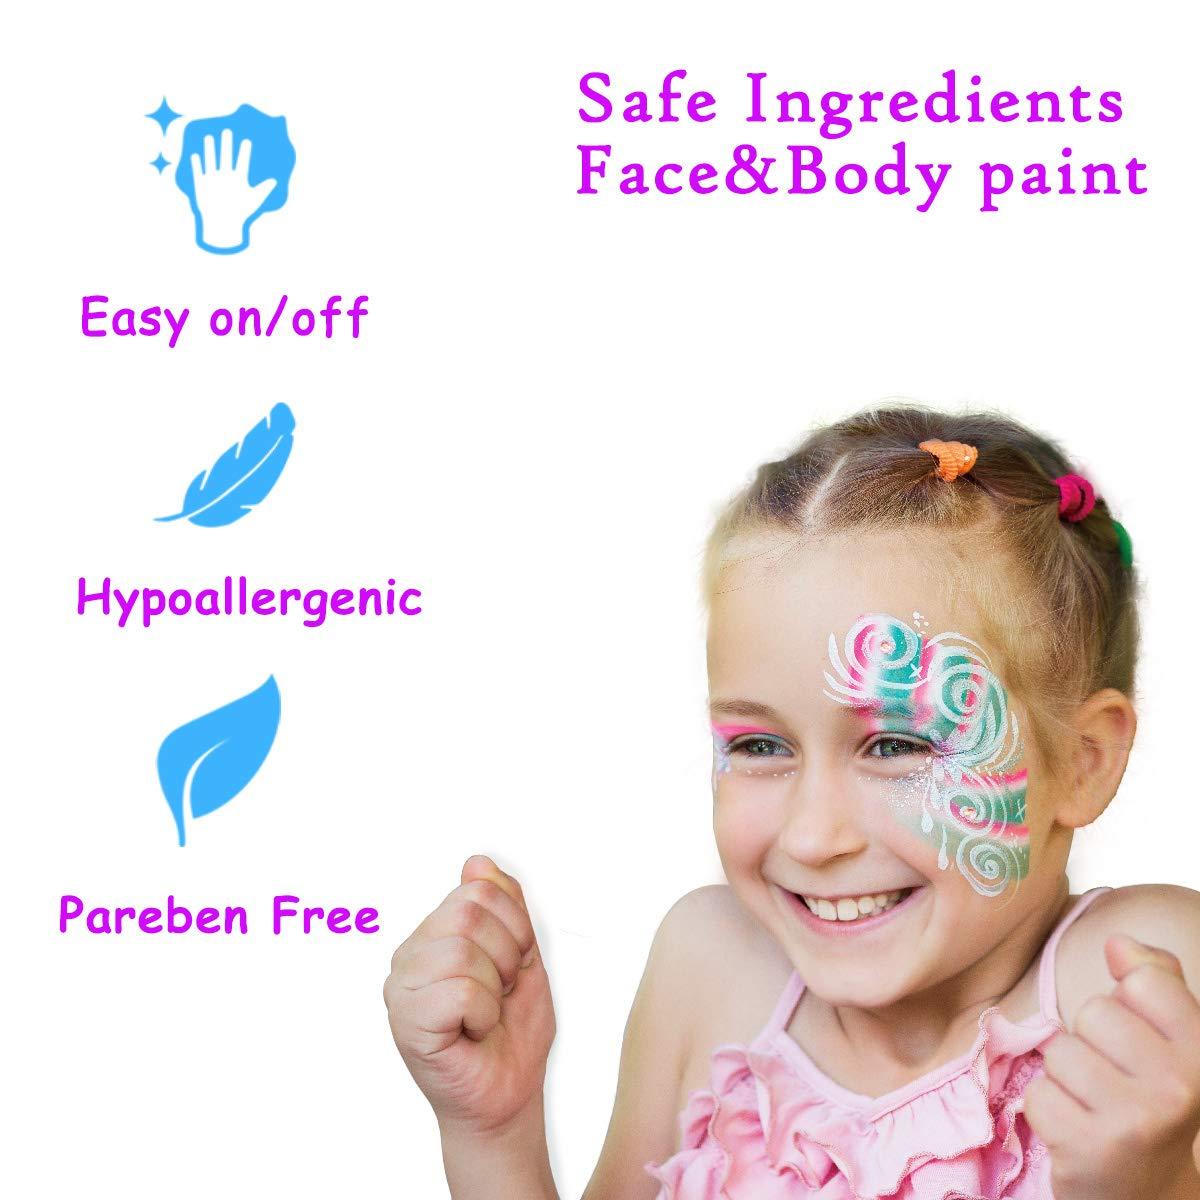 Bowitzki Carnival Professional Face Painting Kit for Kids Adults